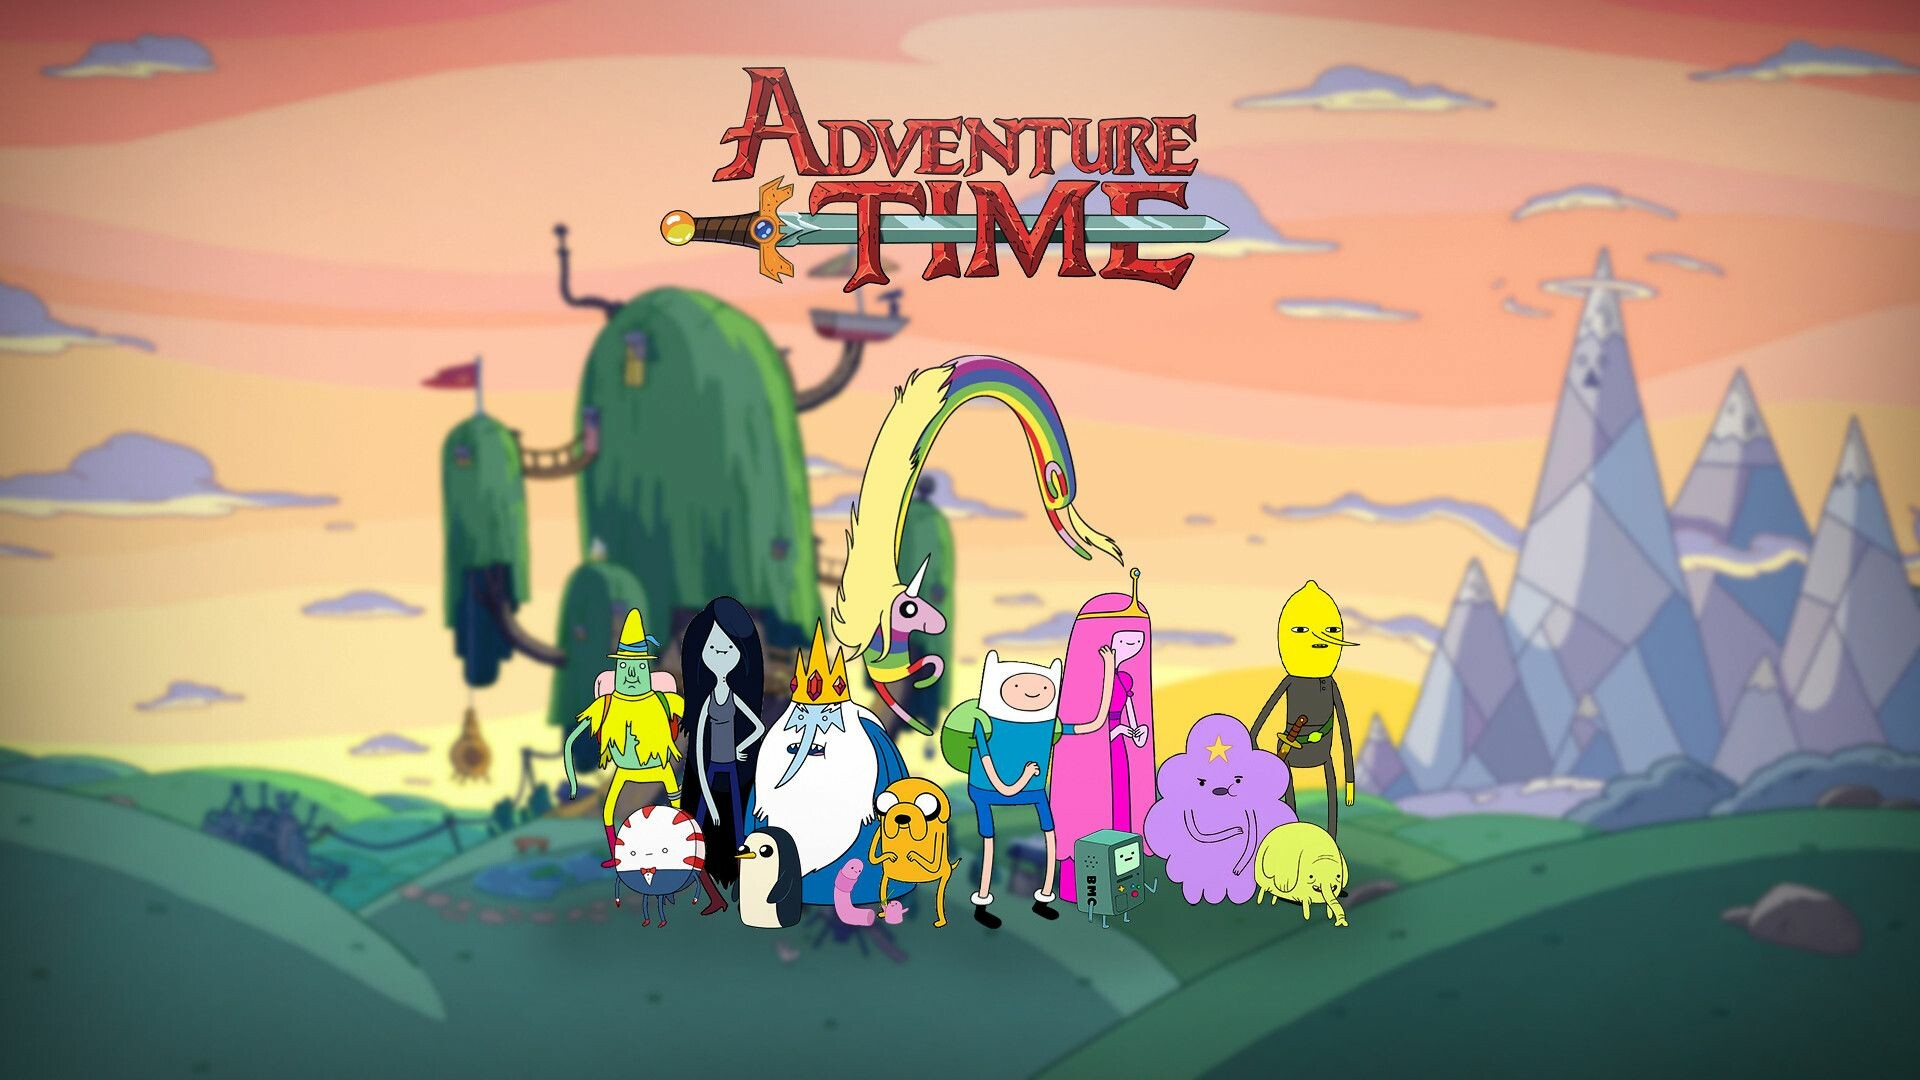 66+ Adventure Time Wallpapers: HD, 4K, 5K for PC and Mobile | Download free  images for iPhone, Android